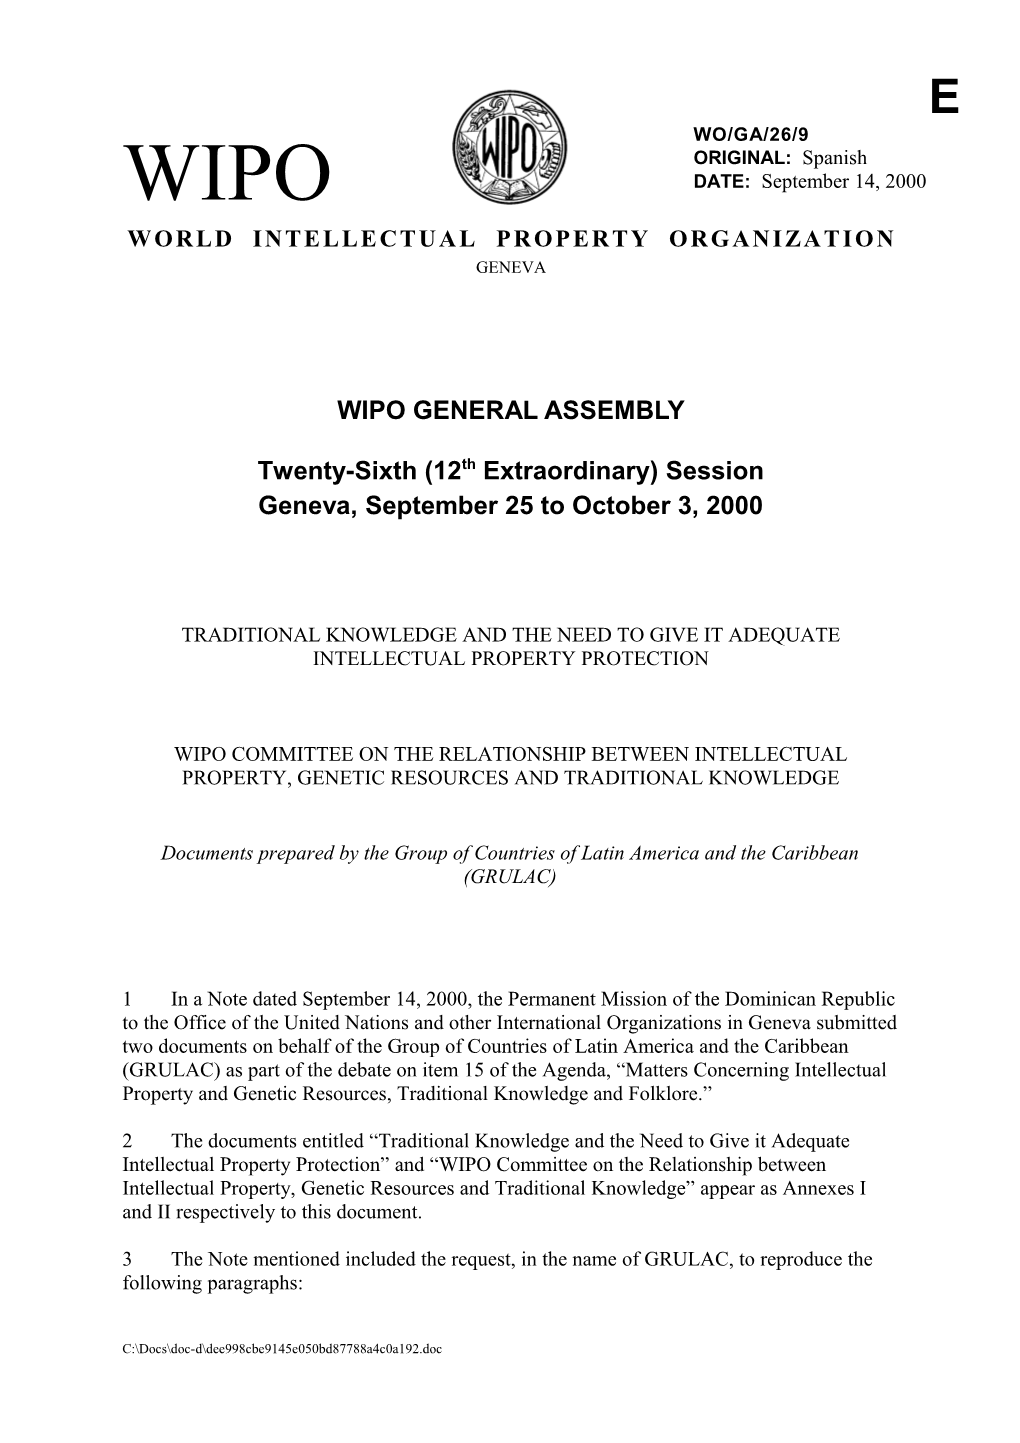 WO/GA/26/9: Traditional Knowledge and the Need to Give It Adequate Intellectual Property